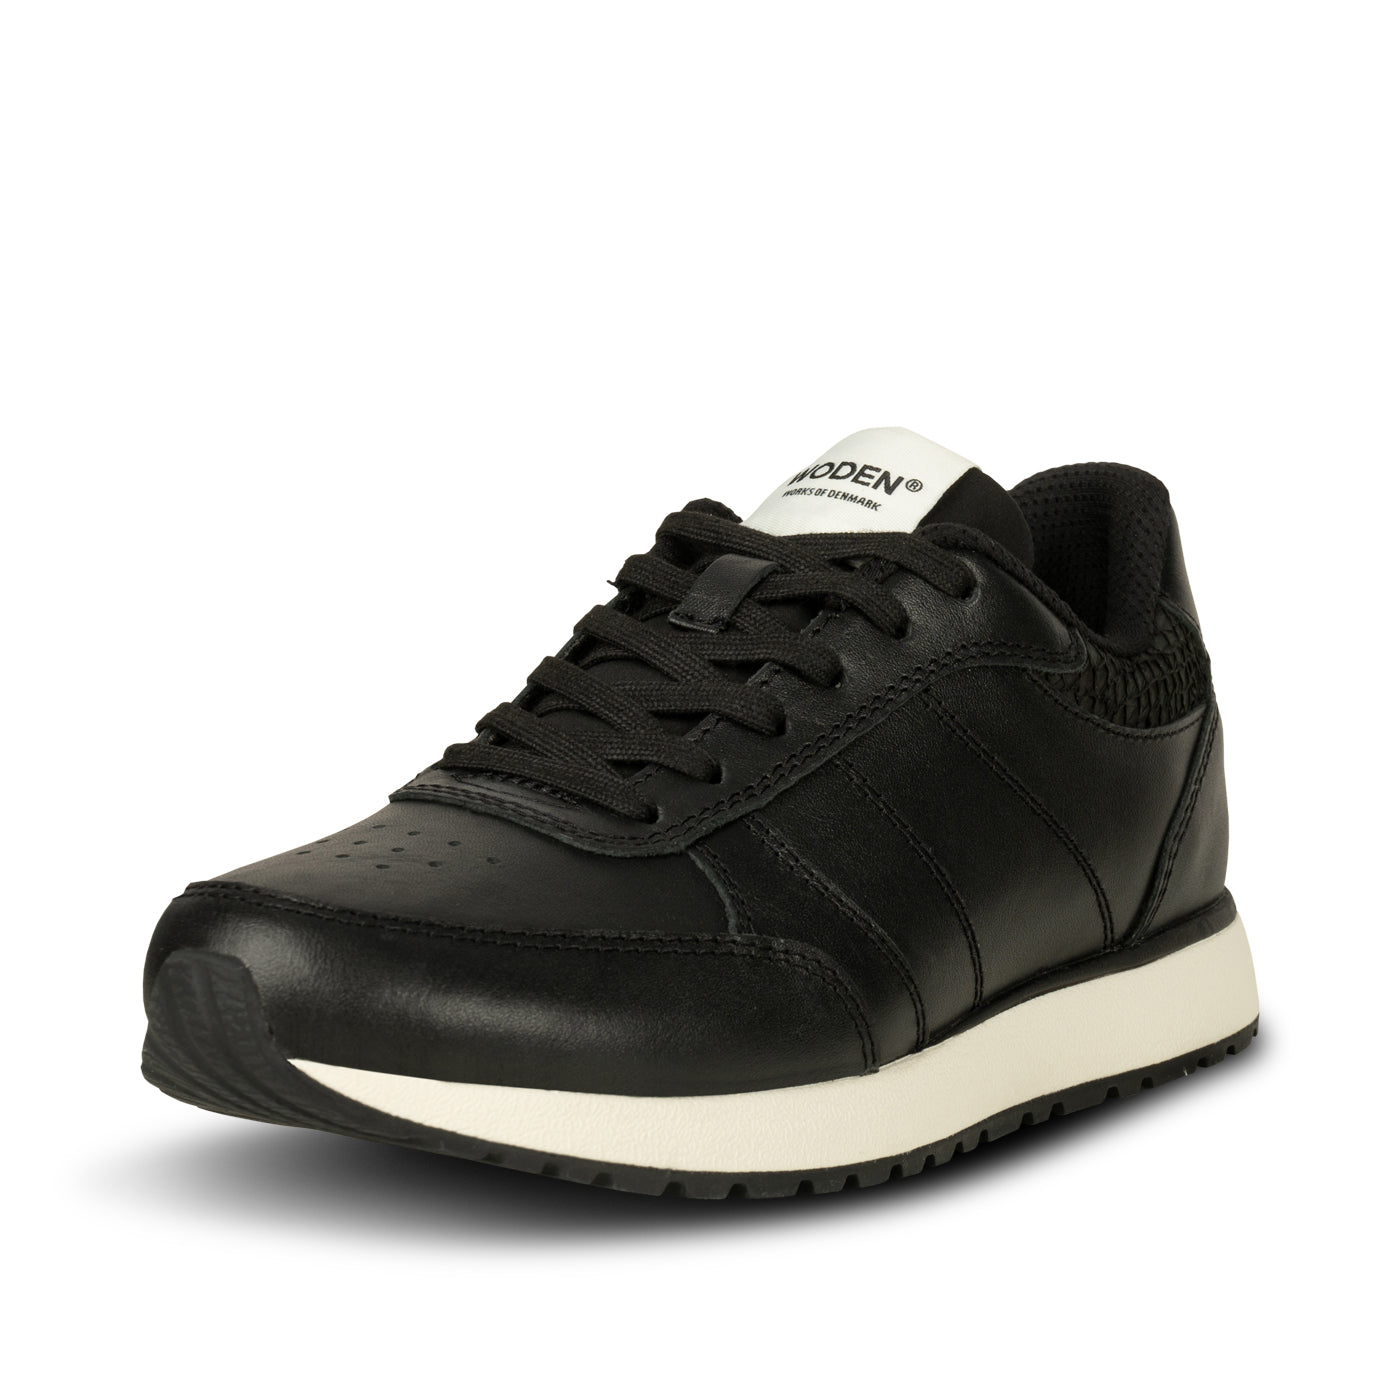 WODEN Ronja Leather Sneakers 020 Black